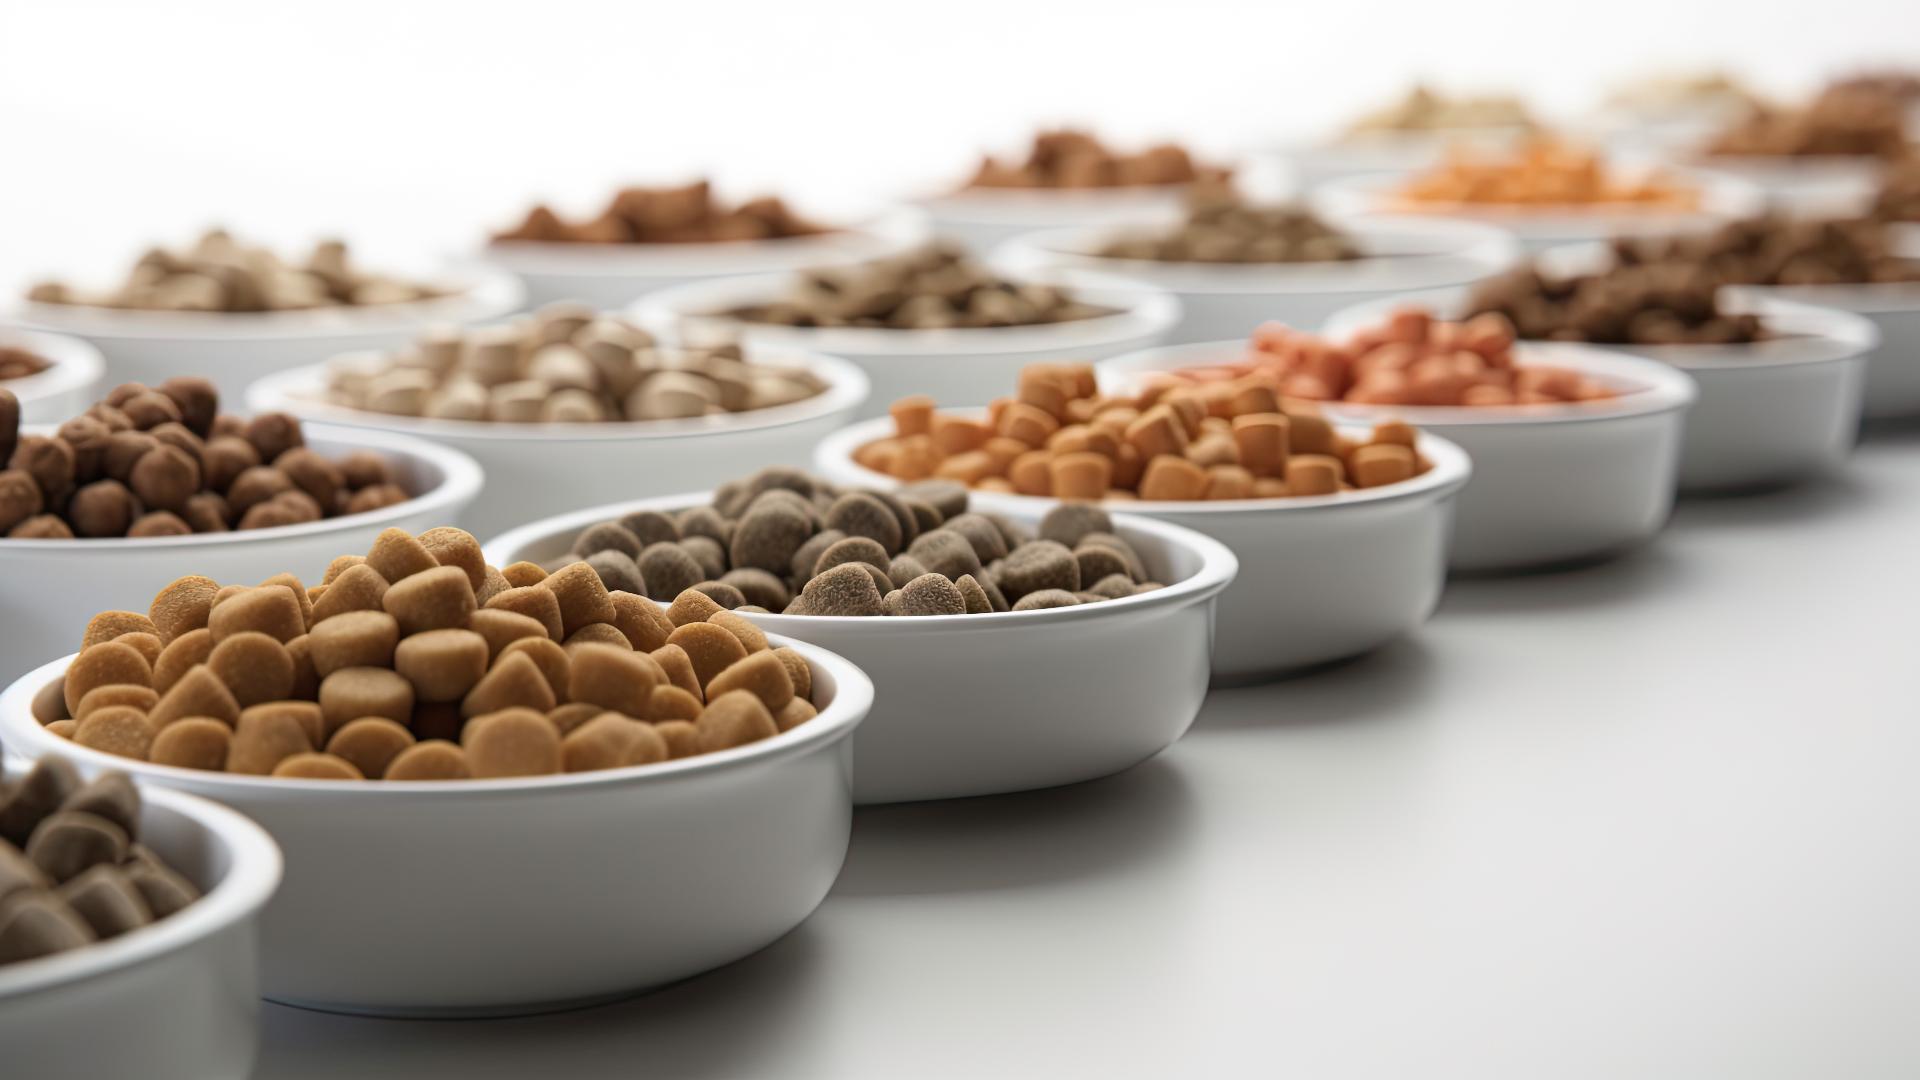 Pet food definition, according to categories